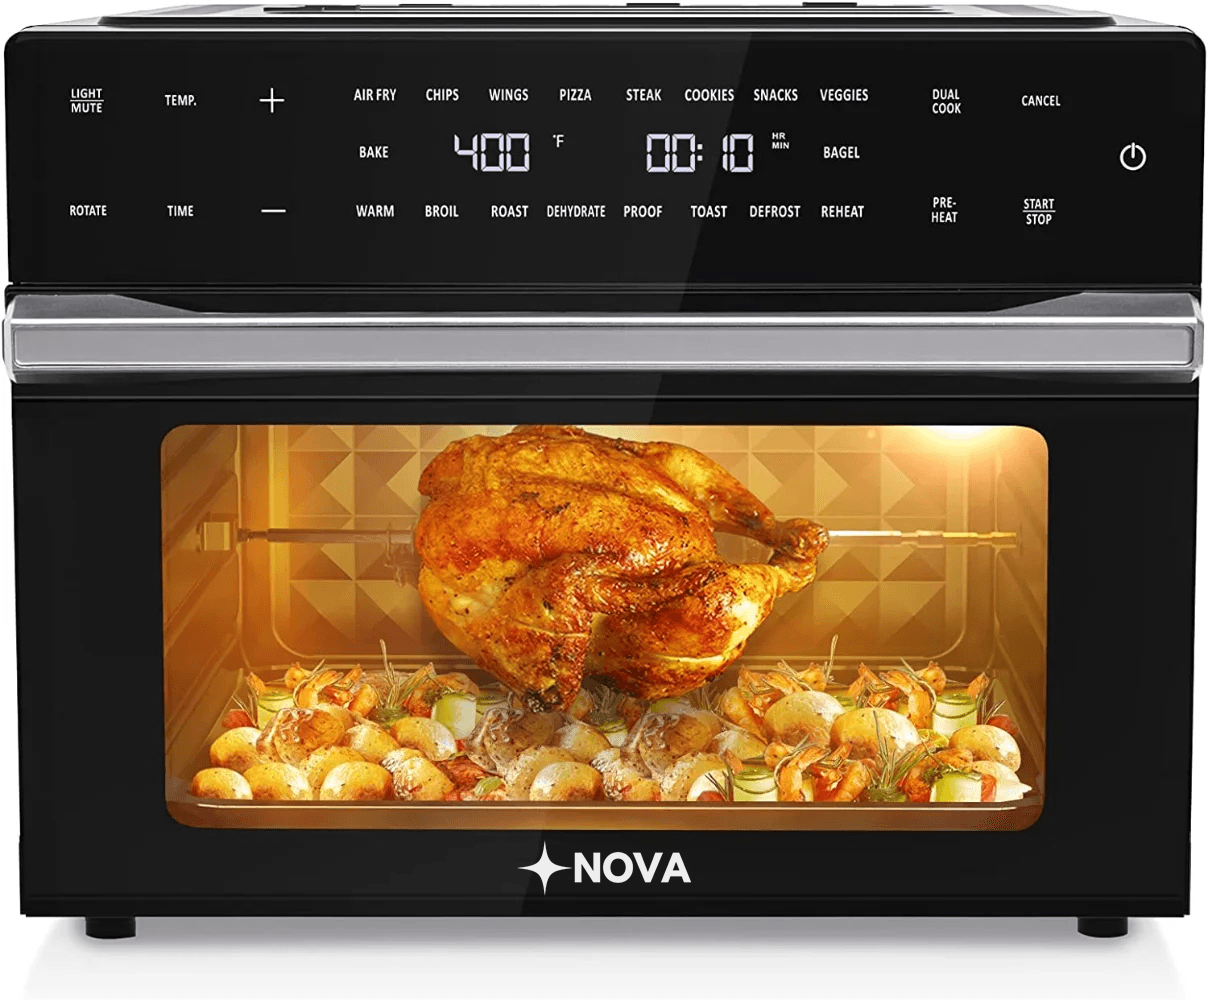 https://cdn.shopify.com/s/files/1/0675/0267/0047/files/Beelicious-32QT-Extra-Large-Air-Fryer-19-In-1-Air-Fryer-Toaster-Oven-Combo-with-Rotisserie-Recovered.png?v=1703535568&width=1208